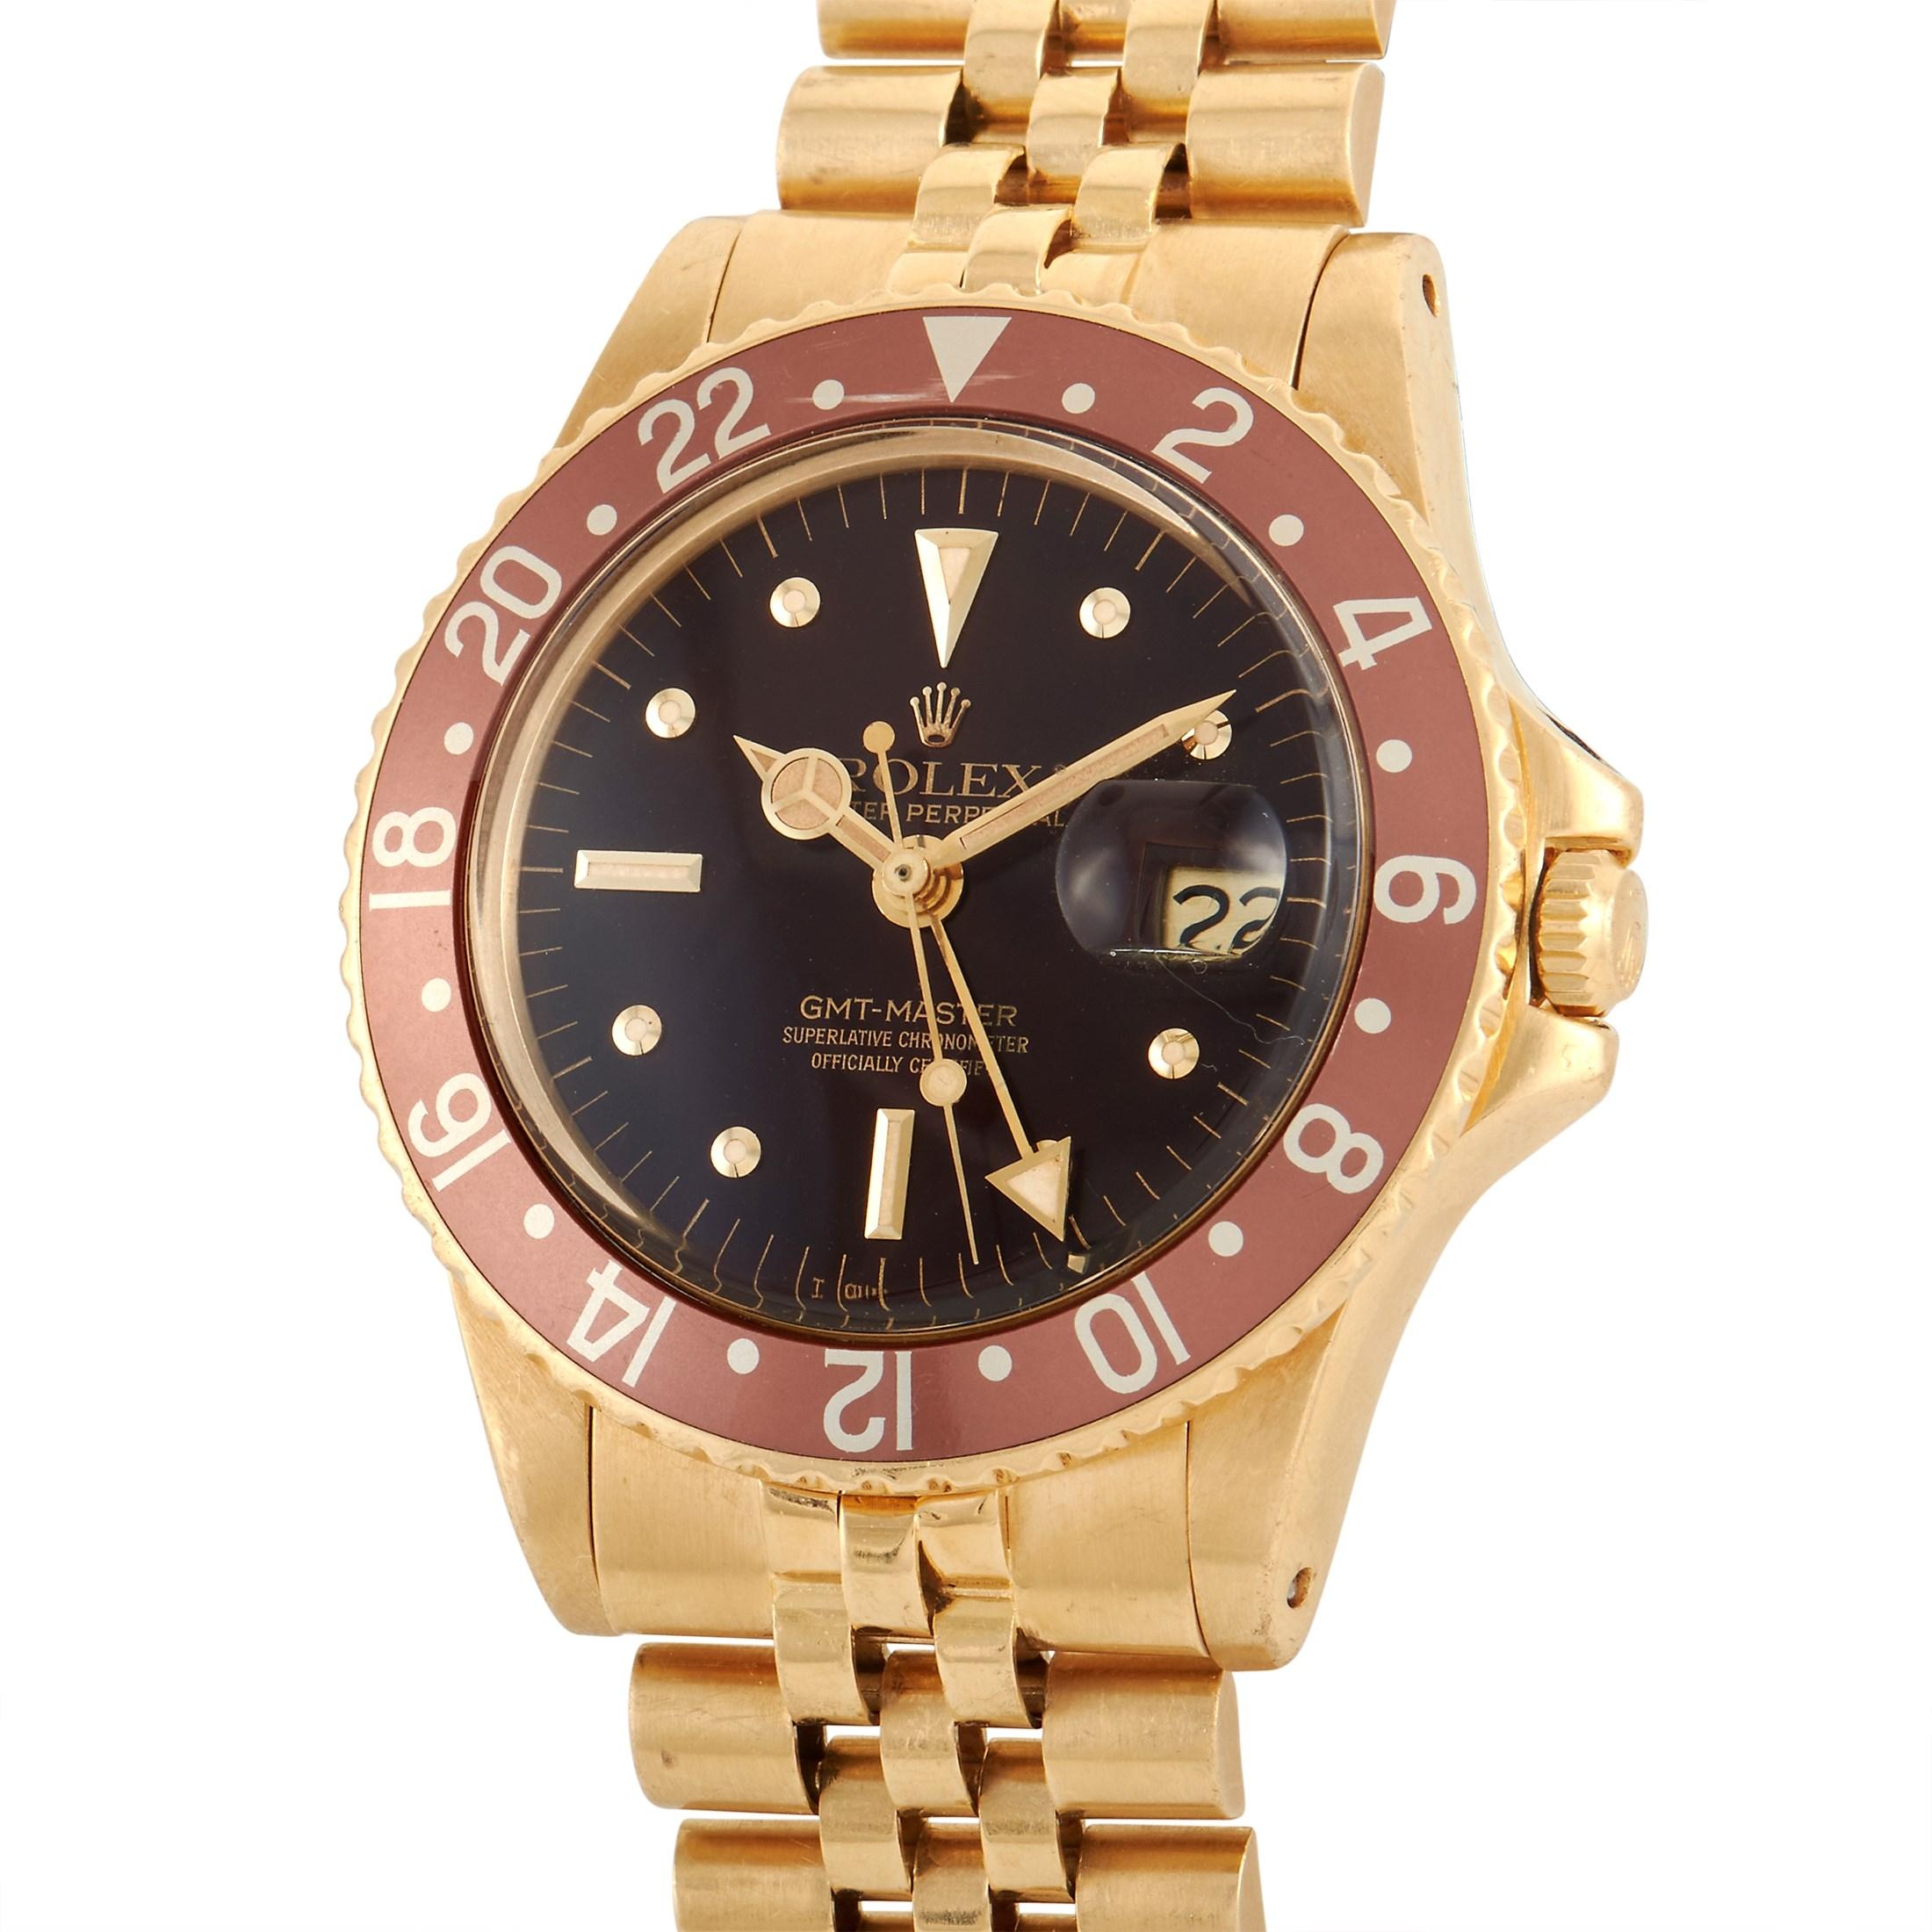 The Rolex GMT-Master Watch, reference number 1675/8, is inherently opulent. 

This dynamic design begins with a 40mm case, fluted bezel, and bracelet crafted from lustrous 18K Yellow Gold. On the brown dial, you’ll find luminous gold toned hands,